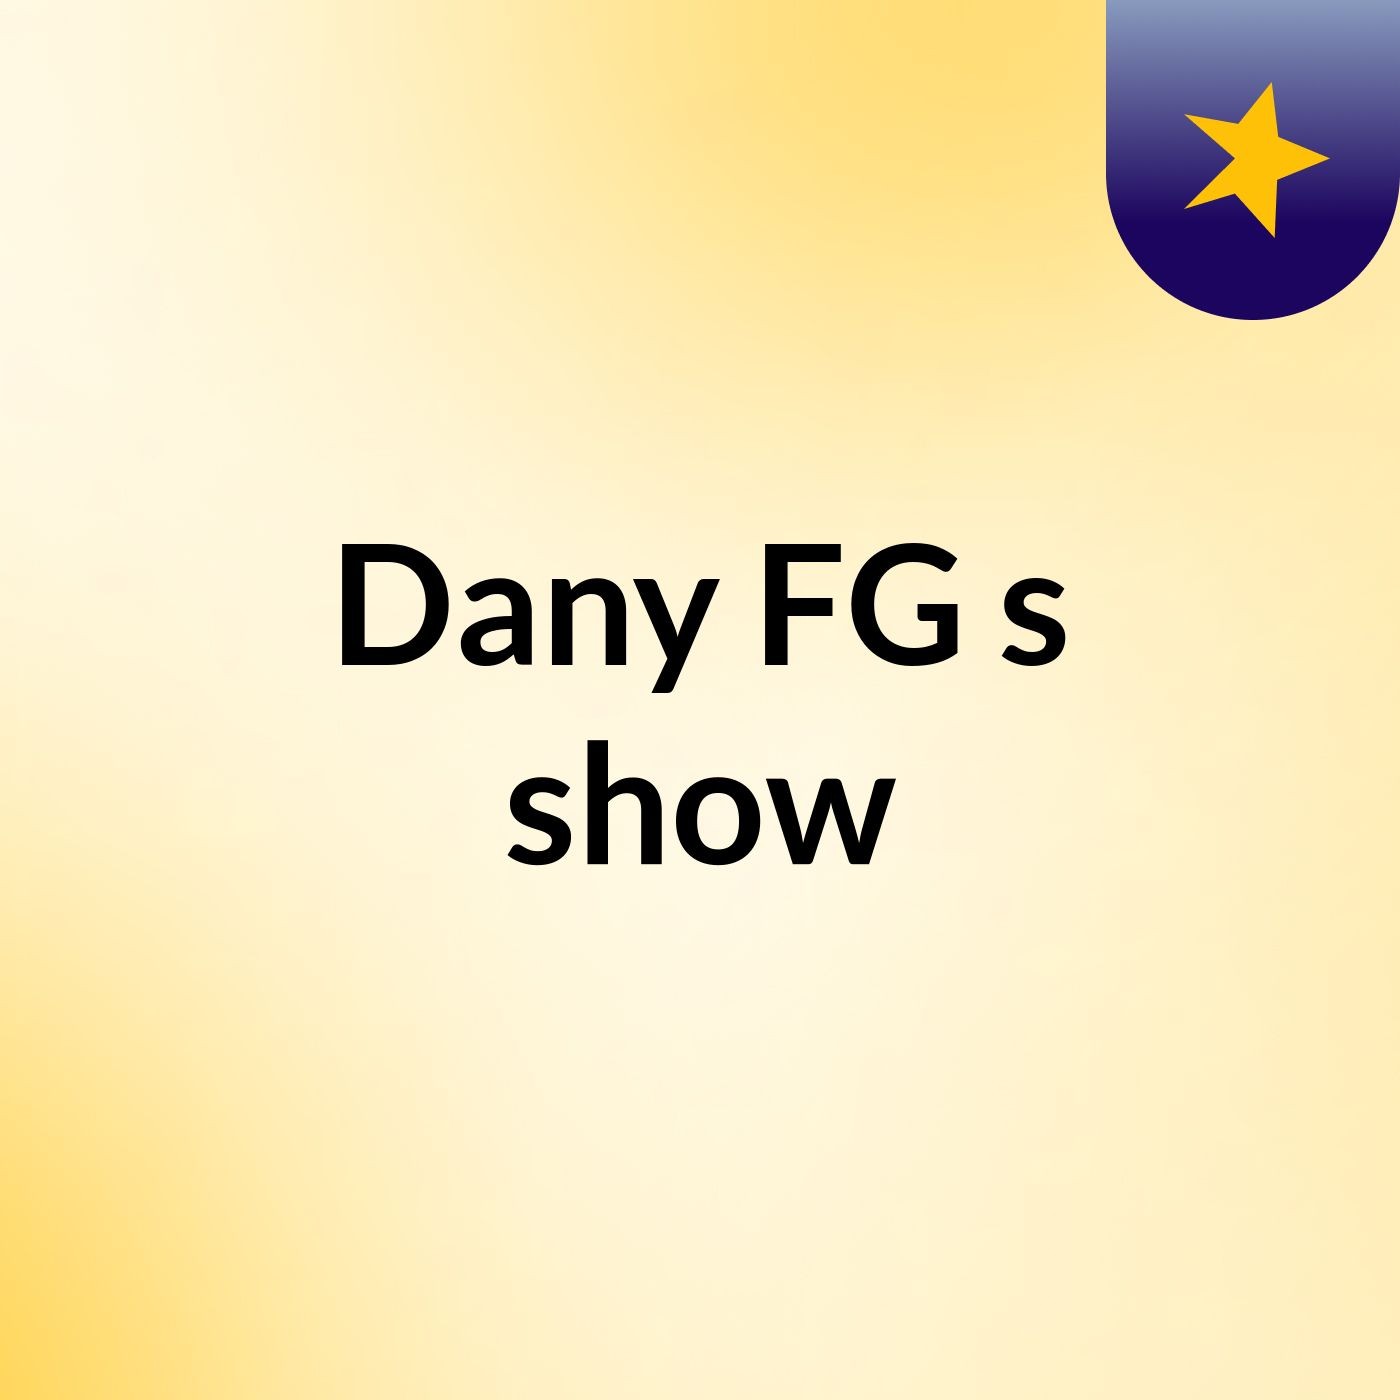 Dany FG's show